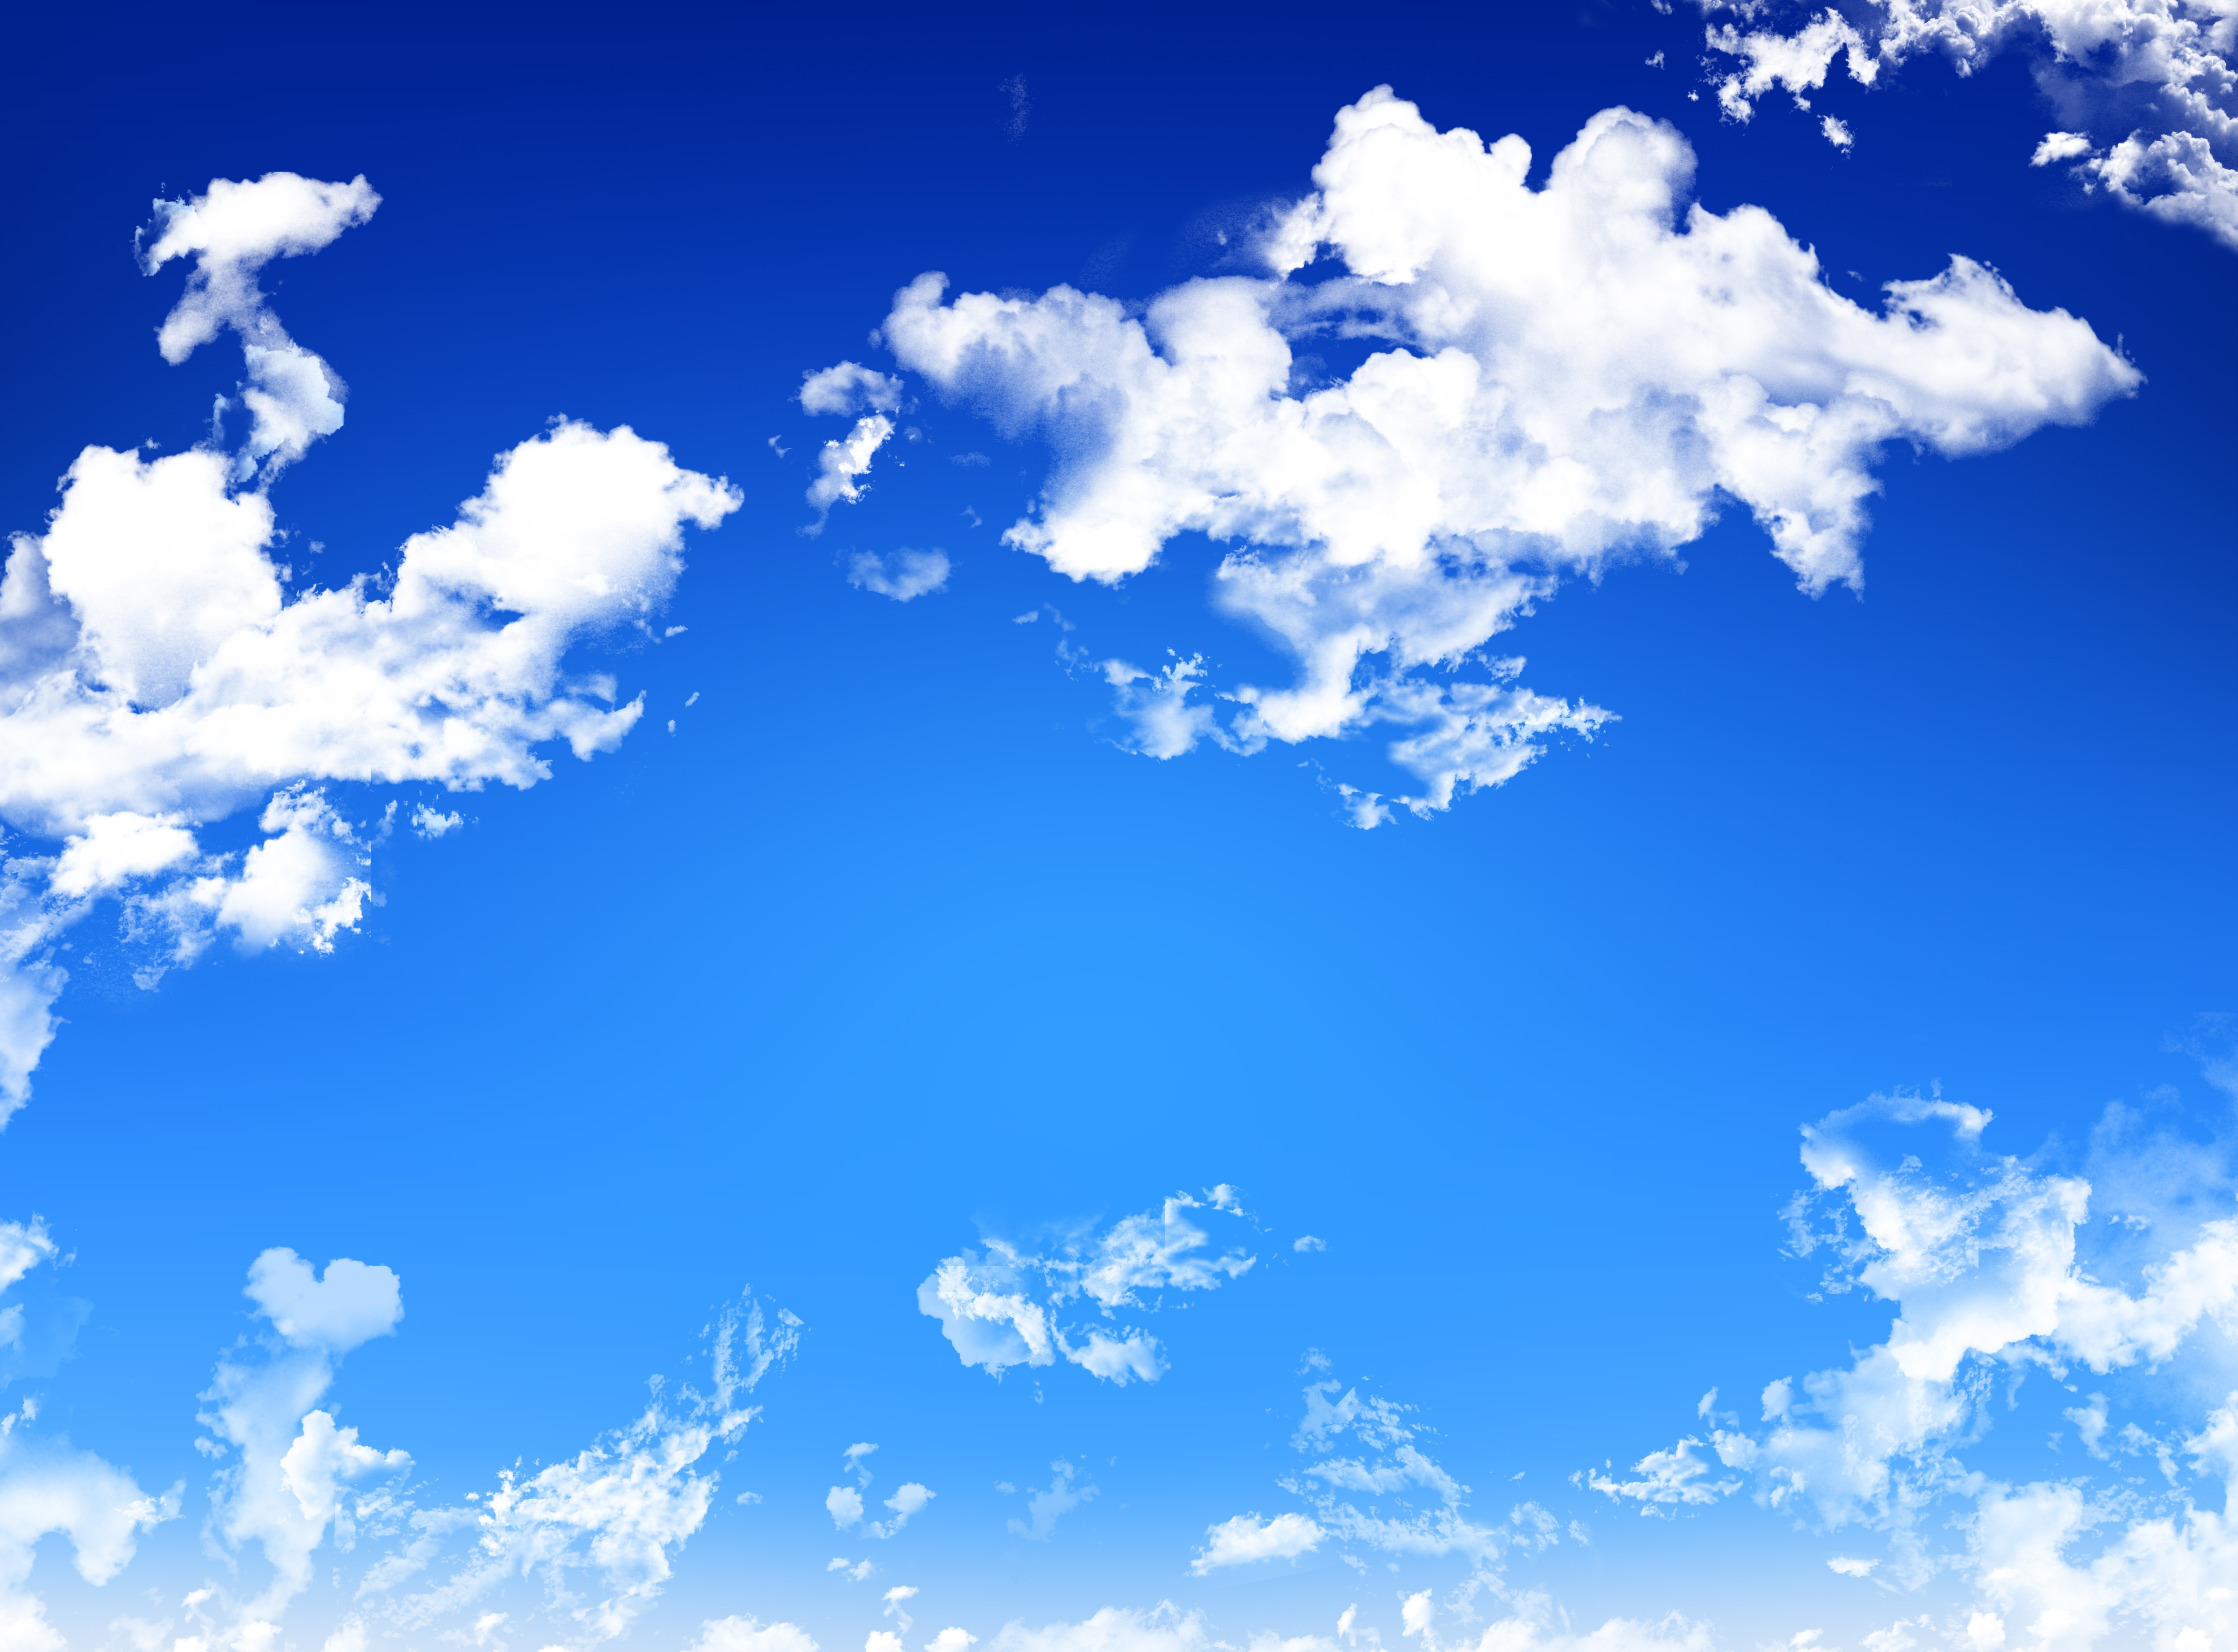 Blue Sky With White Clouds Think Twice - Blue Sky Desktop - HD Wallpaper 